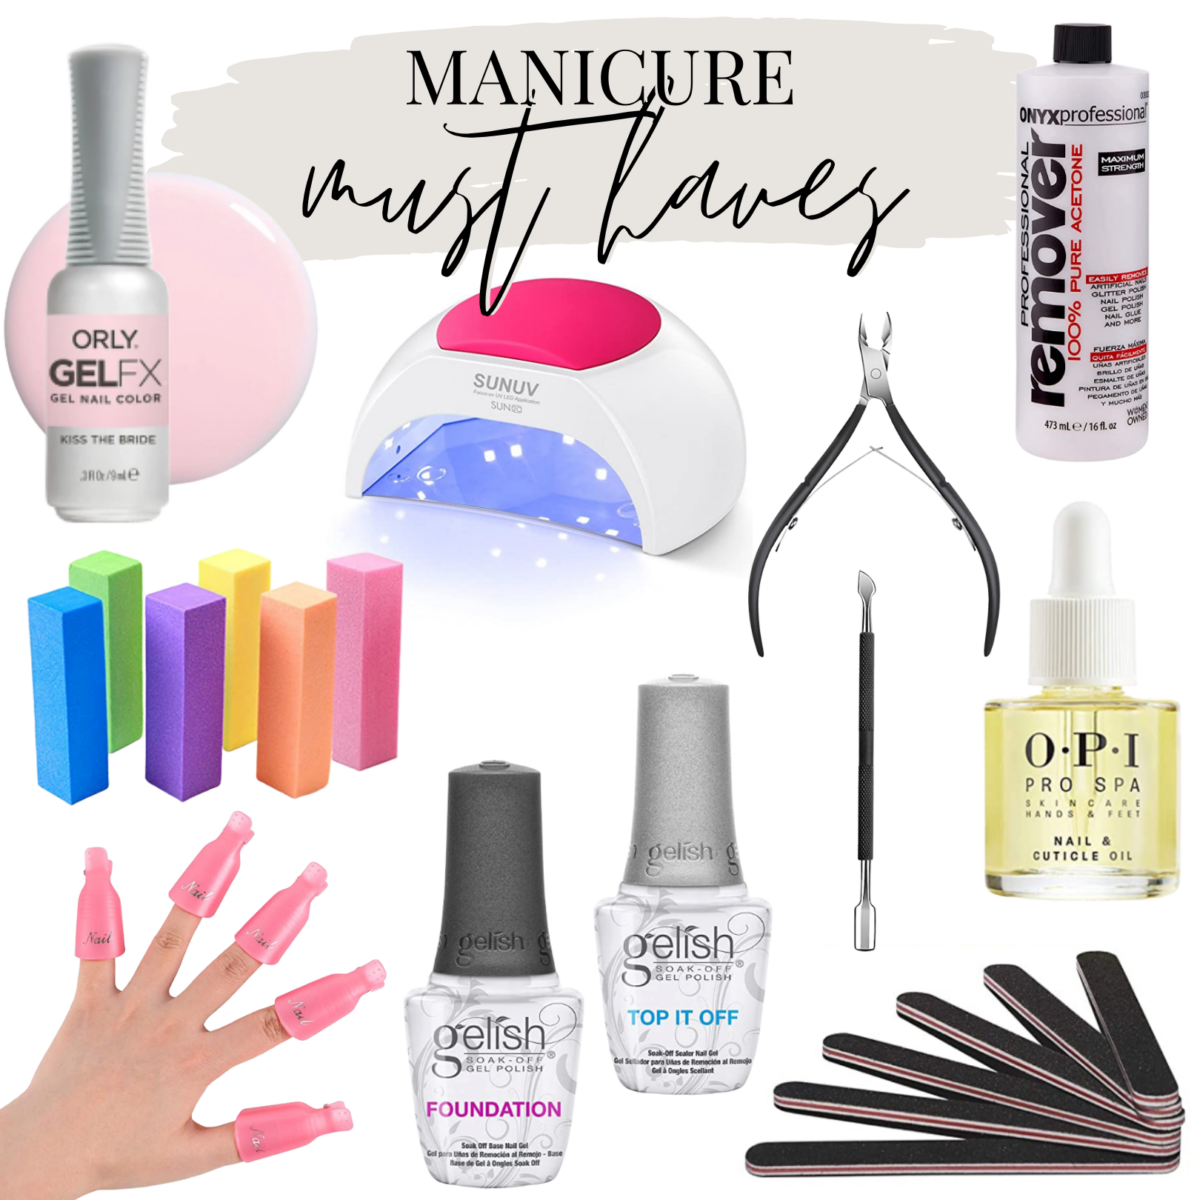  At Home Gel Manicure by popular Houston beauty blog, Haute and Humid: collage image of Orly GEL FX, SunUV, cuticle clippers, cuticle pusher, acetone nail polish remover, nail file, nail buffer, Gelish foundation, Gelish top it off, OPI pro spa nail and cuticle oil.  